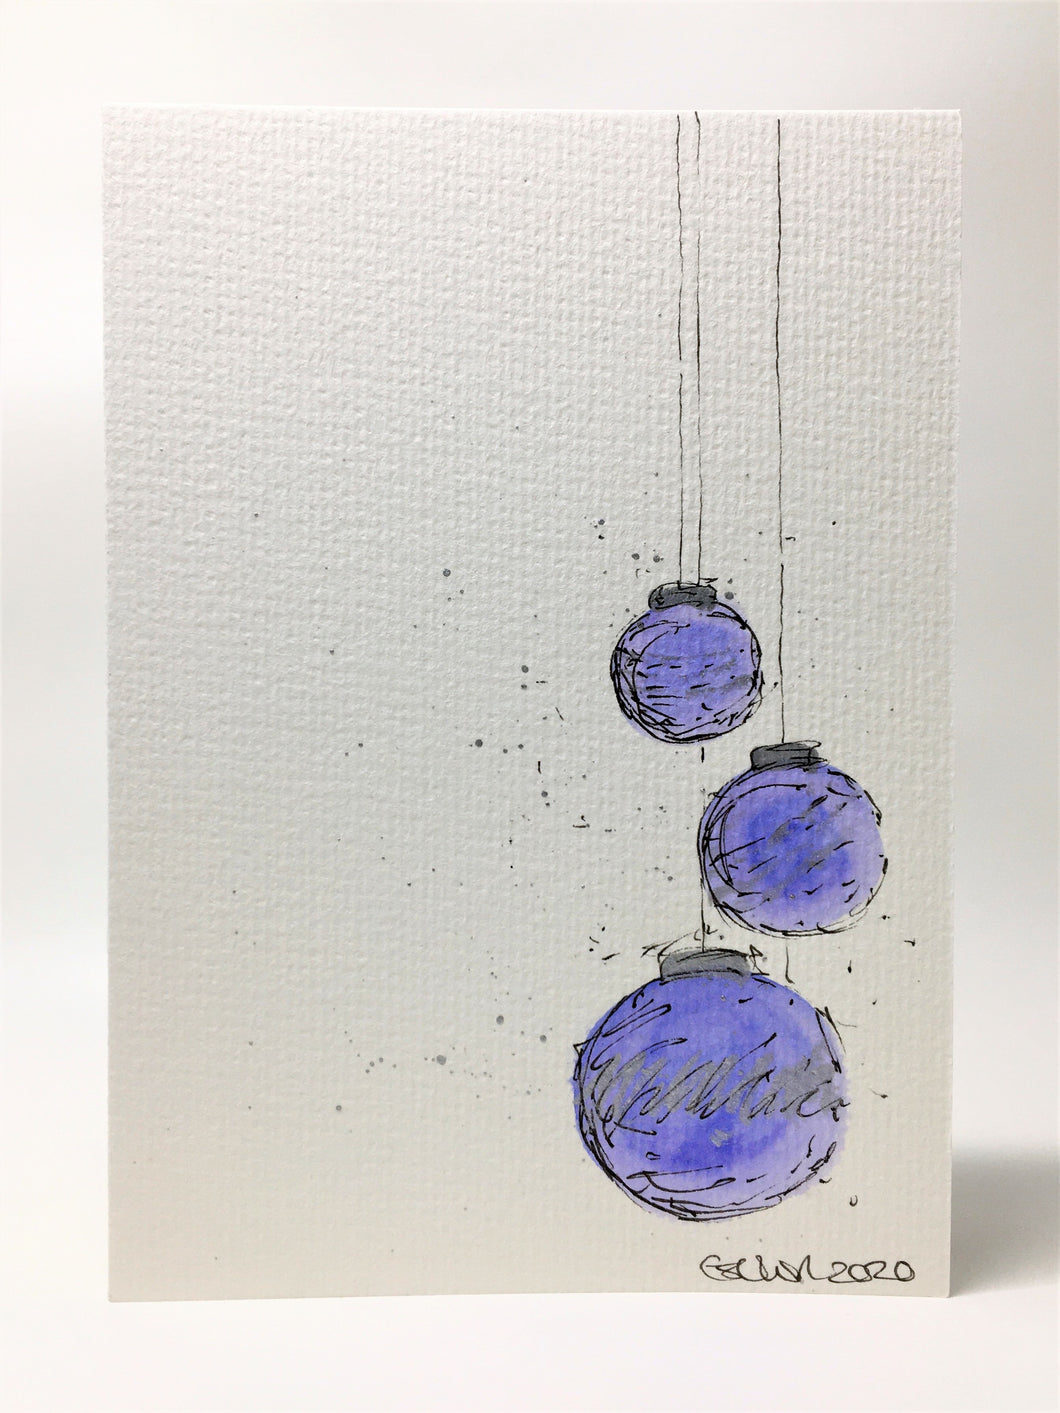 Original Hand Painted Christmas Card - Bauble Collection - 3 Lilac and Silver Splatter Baubles - eDgE dEsiGn London